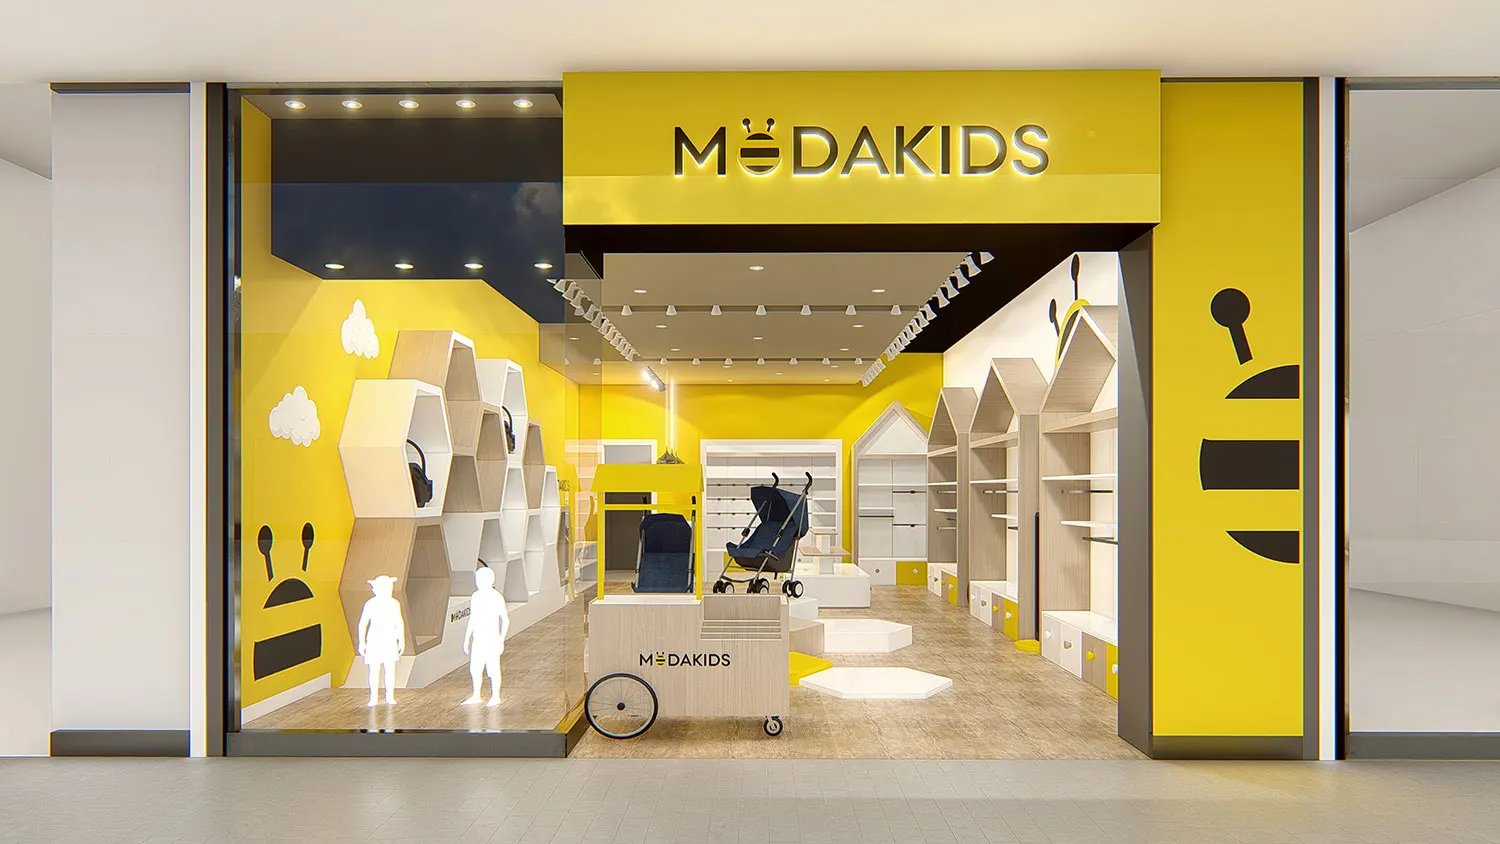 Exterior design project for Modakids. Designed storefront with 3D rendering